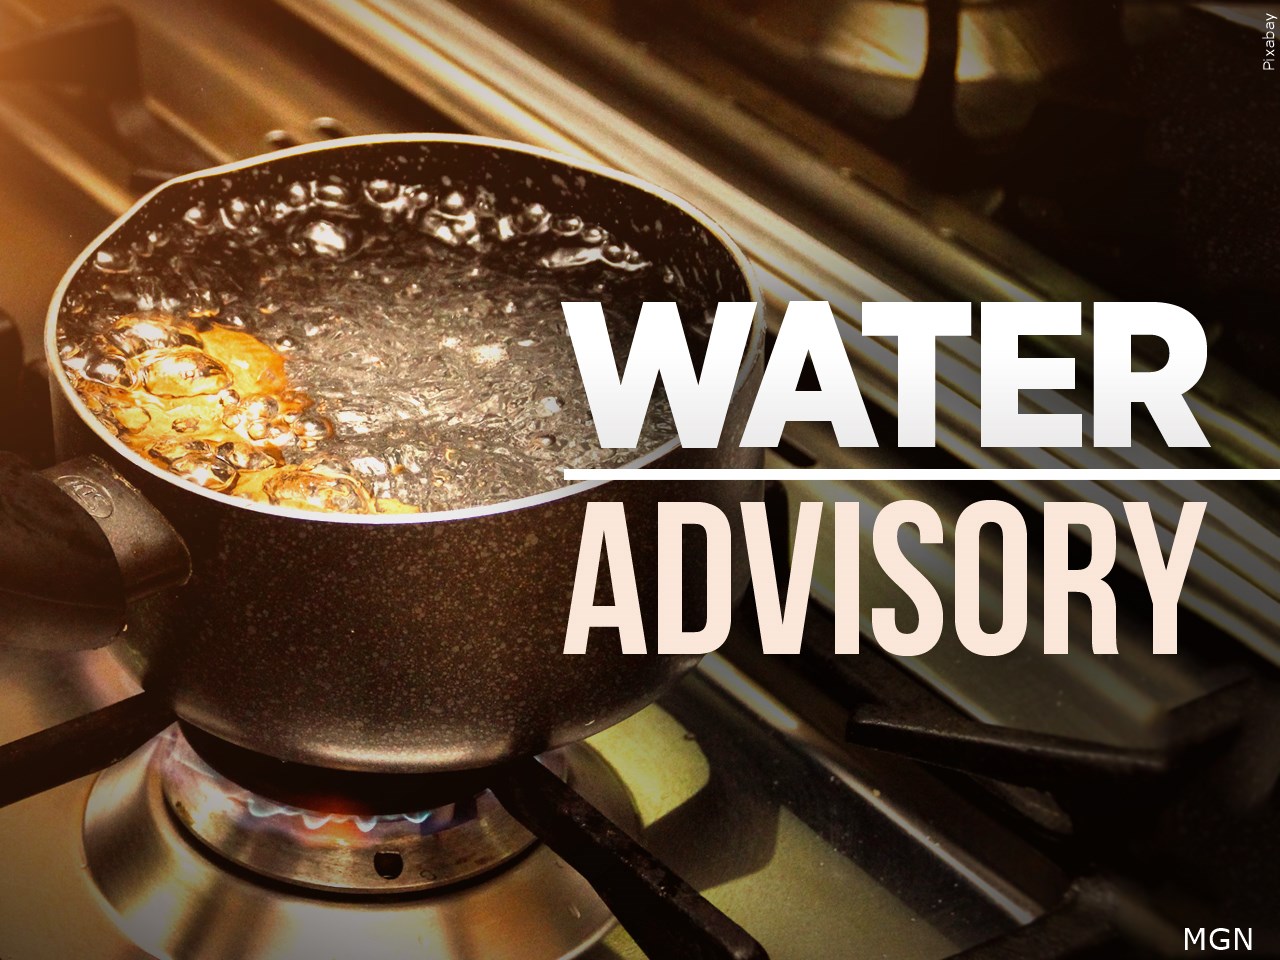 Boil Water Advisory in effect for Lewisburg - West Virginia Daily News